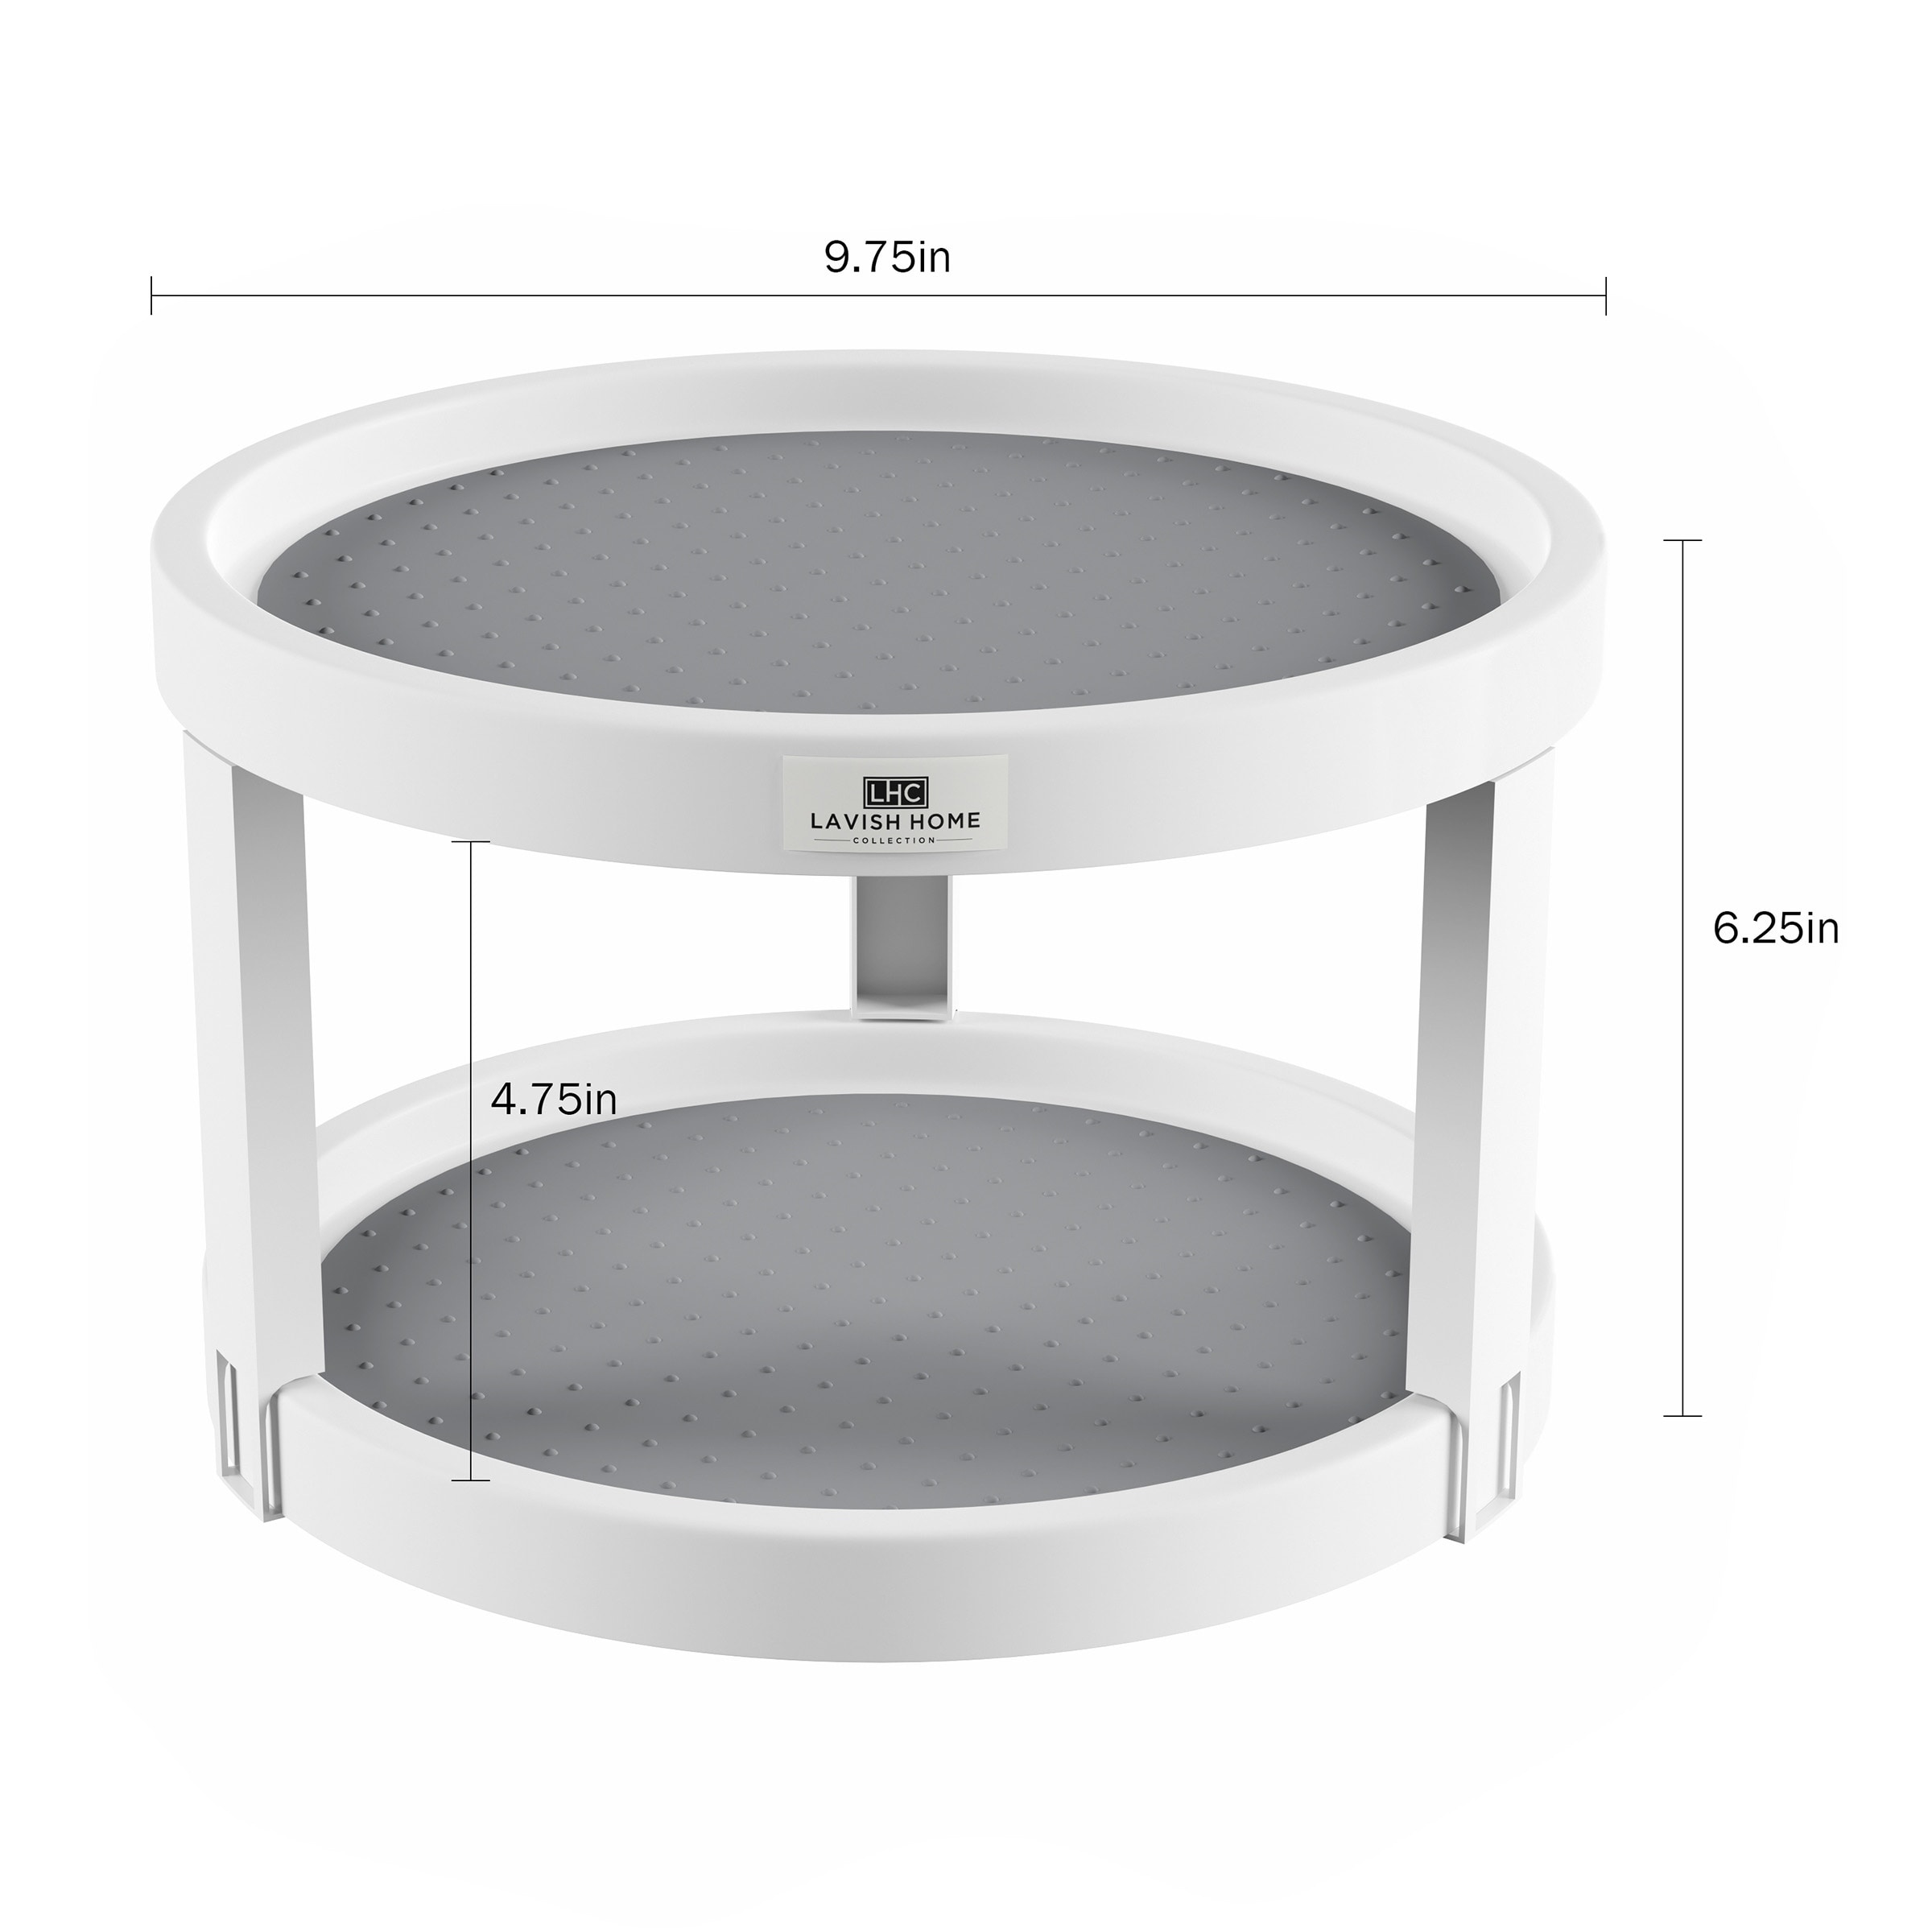 Lazy Susan- 9.75 Inch Diameter Plastic Round Turntable Kitchen, Pantry and  Vanity Organizer with Non-Skid Liner by Lavish Home Bed Bath  Beyond  27778715